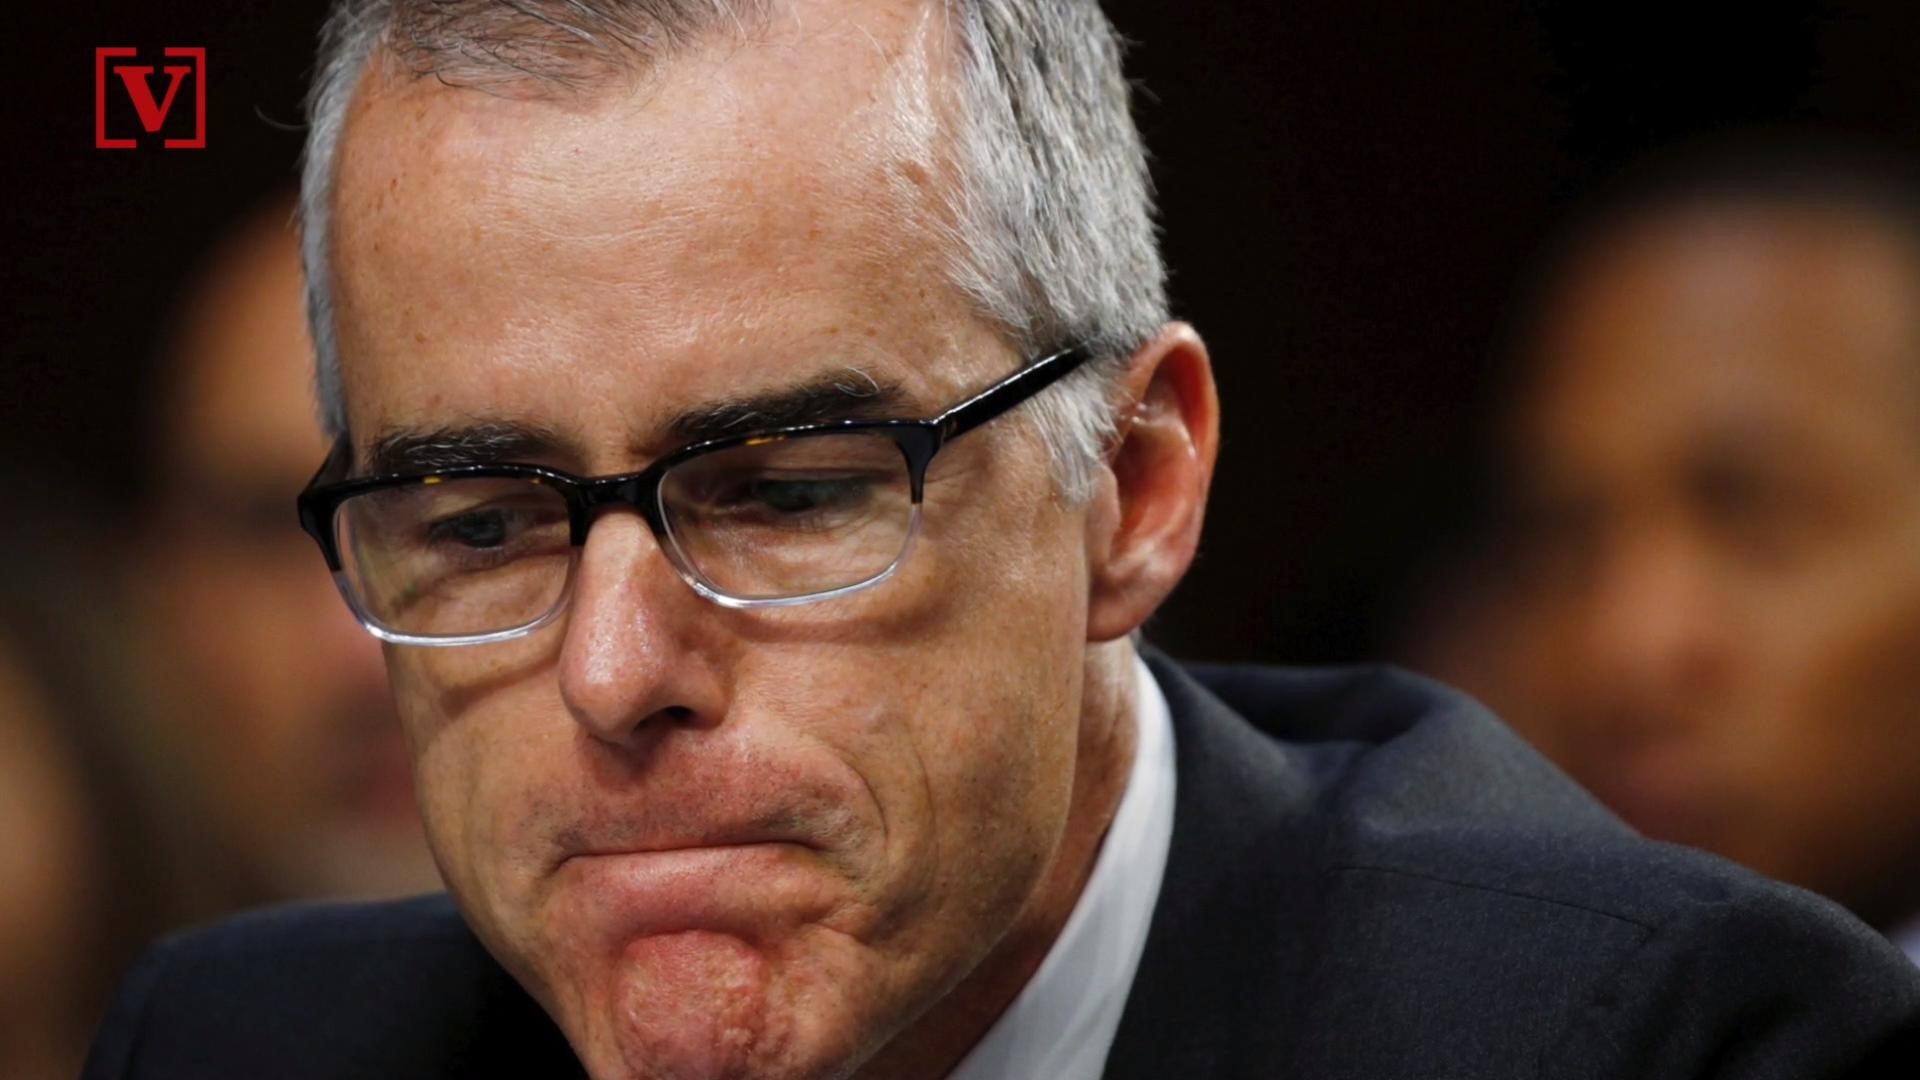 FBI Deputy Director Andrew Mccabe stepped down from his position, according to NBC.